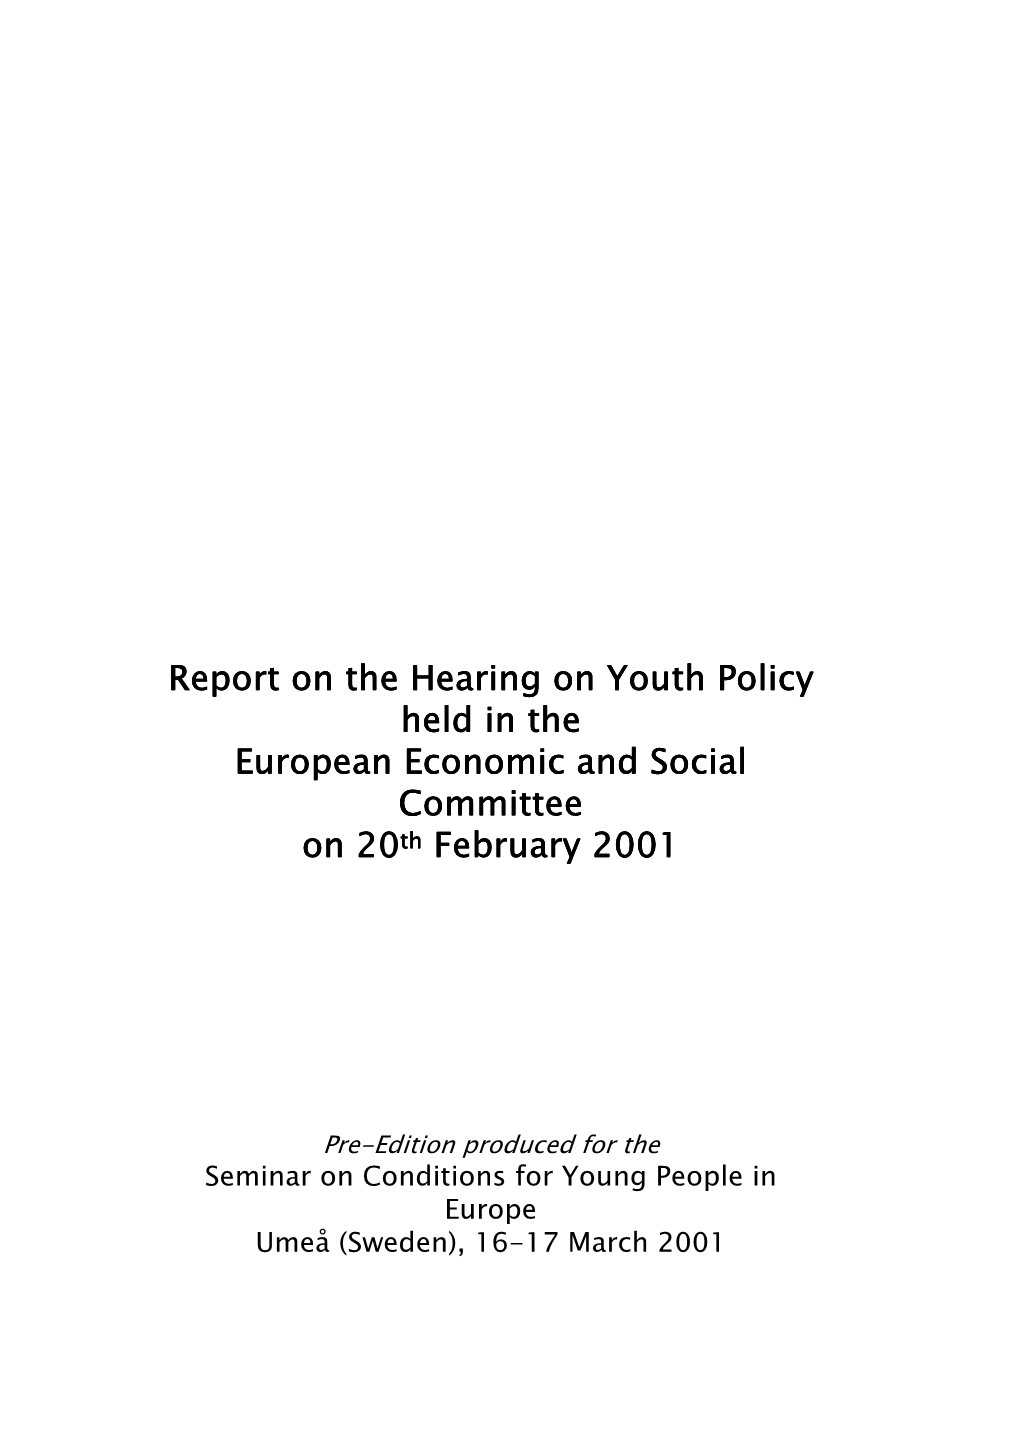 Youth Policy Held in the European Economic and Social Committee on 20Th February 2001